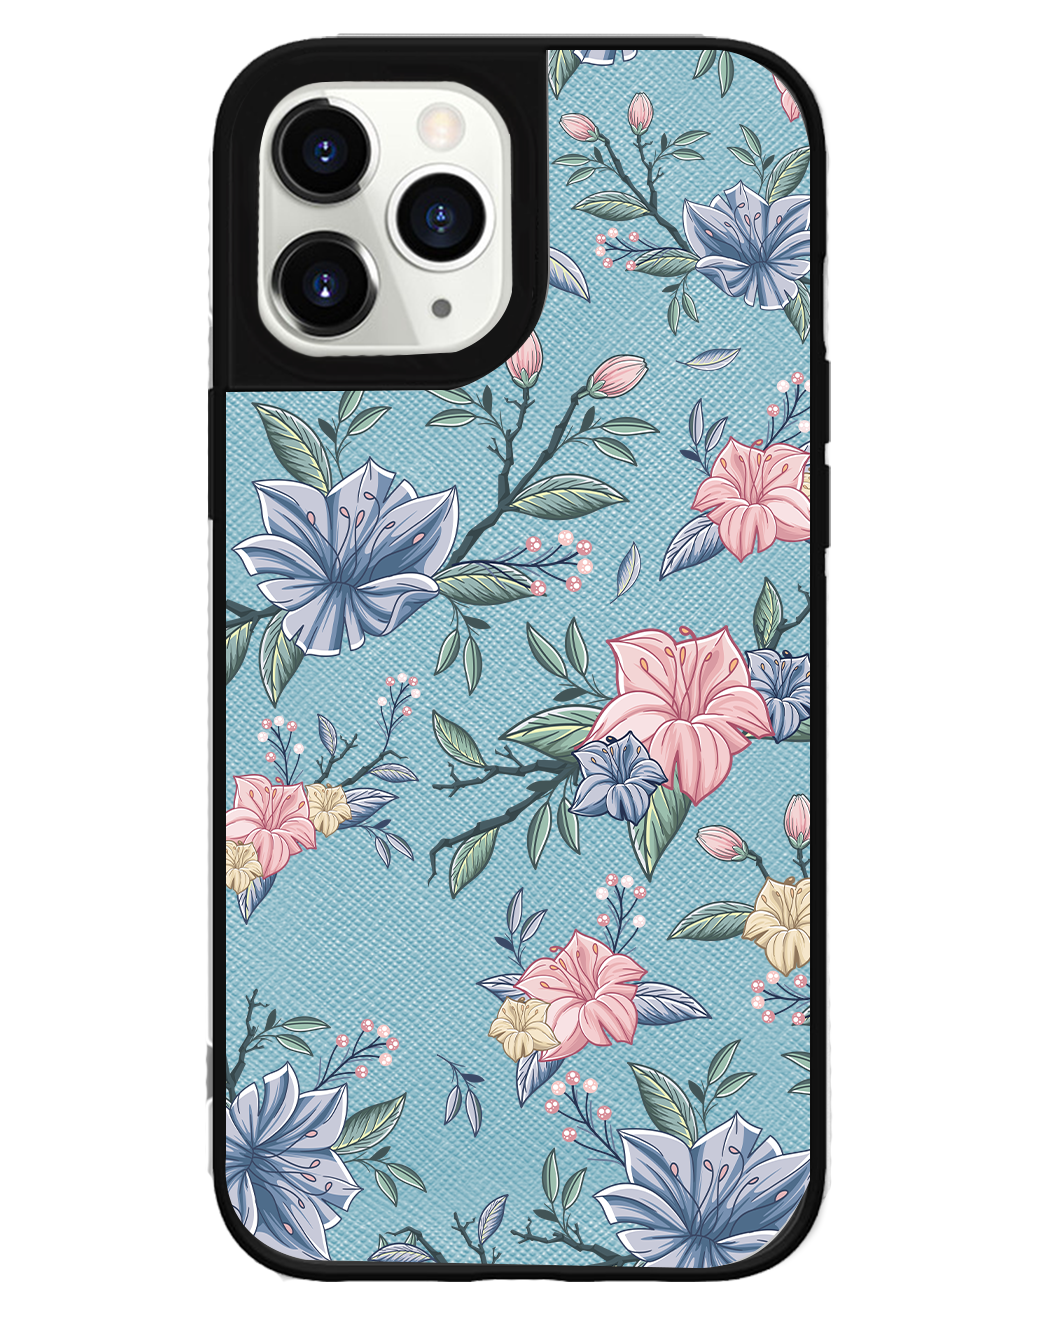 iPhone Leather Grip Case - Pink & Blue Florals